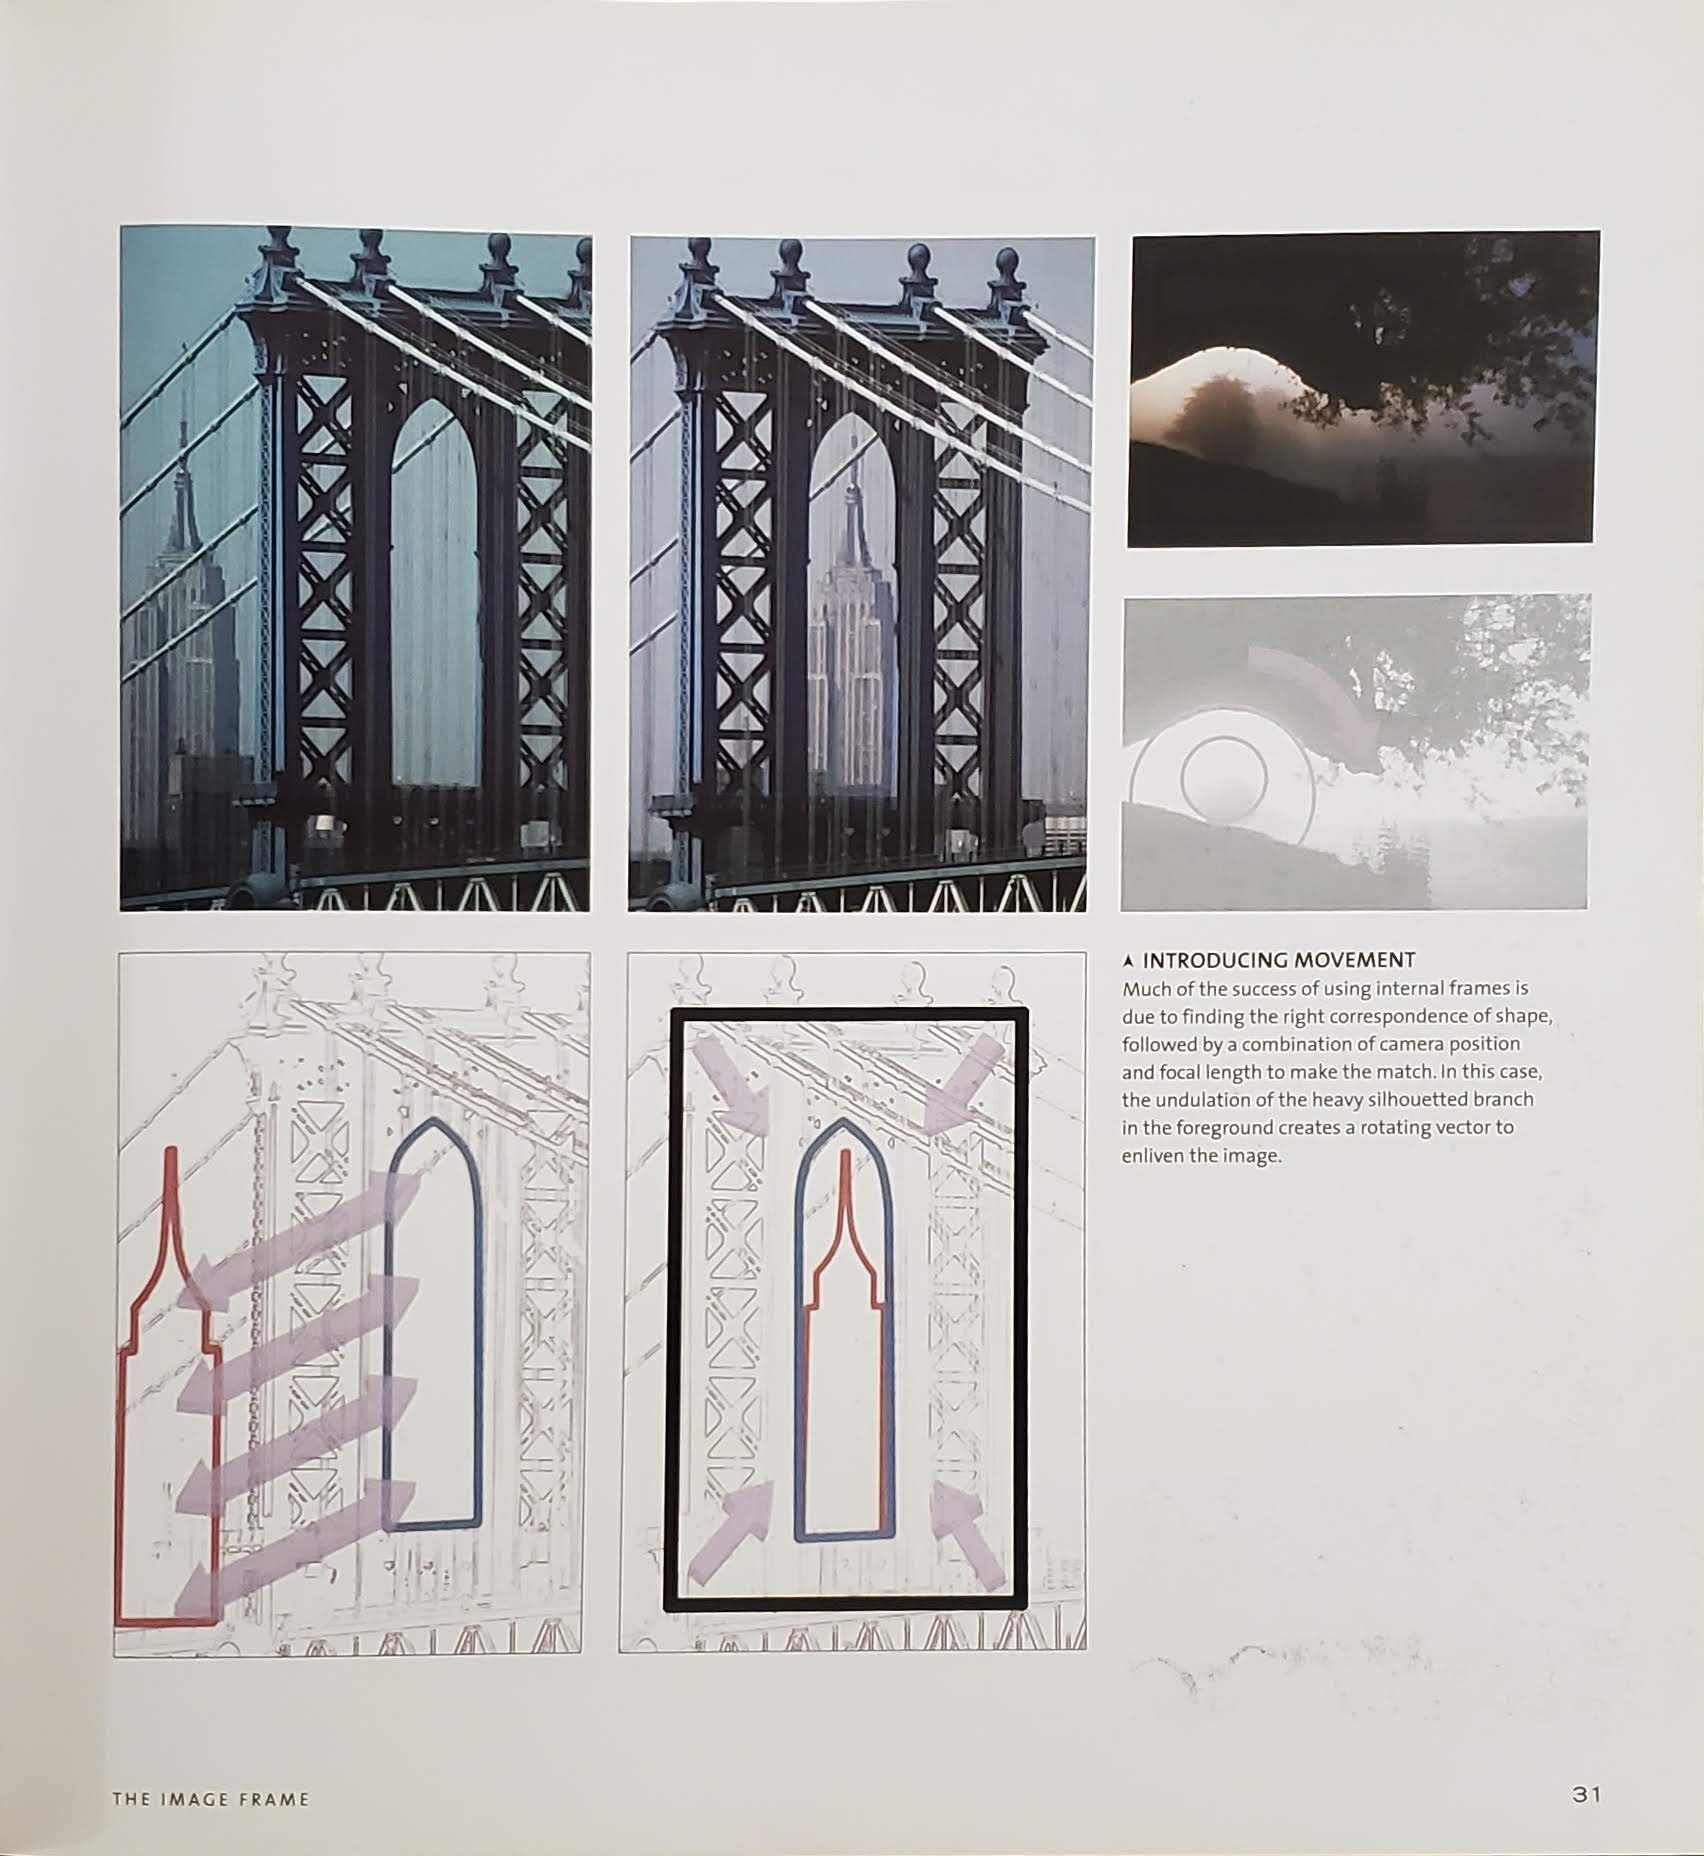 An example of the excellent illustrations throughout this book from page 31, describing the impact of "frames within frames", showing the effect side-by-side with an image of the Empire State Building framed beside an archway along the Brooklyn Bridge next to one where it seems to sit within the arch, alongside simplified color diagrams of each.